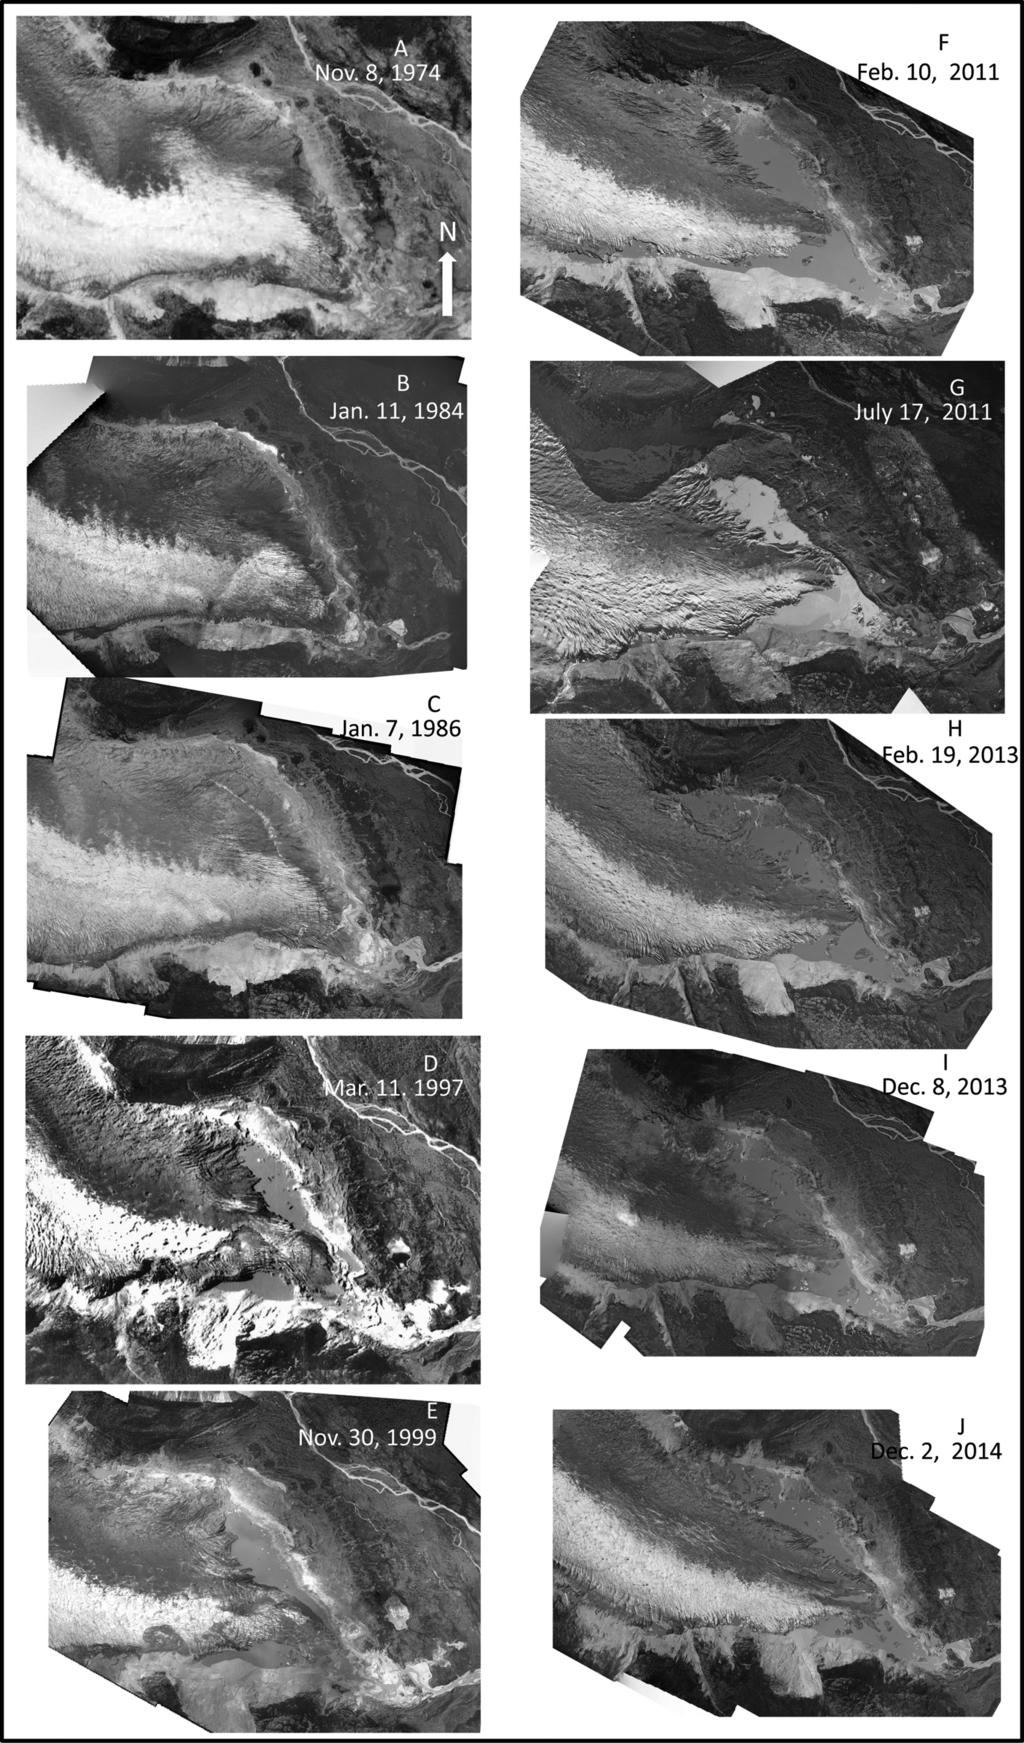 ANIYA Fig. 9. Detailed variations of Gl. Soler using (semi) vertical photographs of the snout area from 1974 (Nov. 8) to 2014 (Dec. 2).